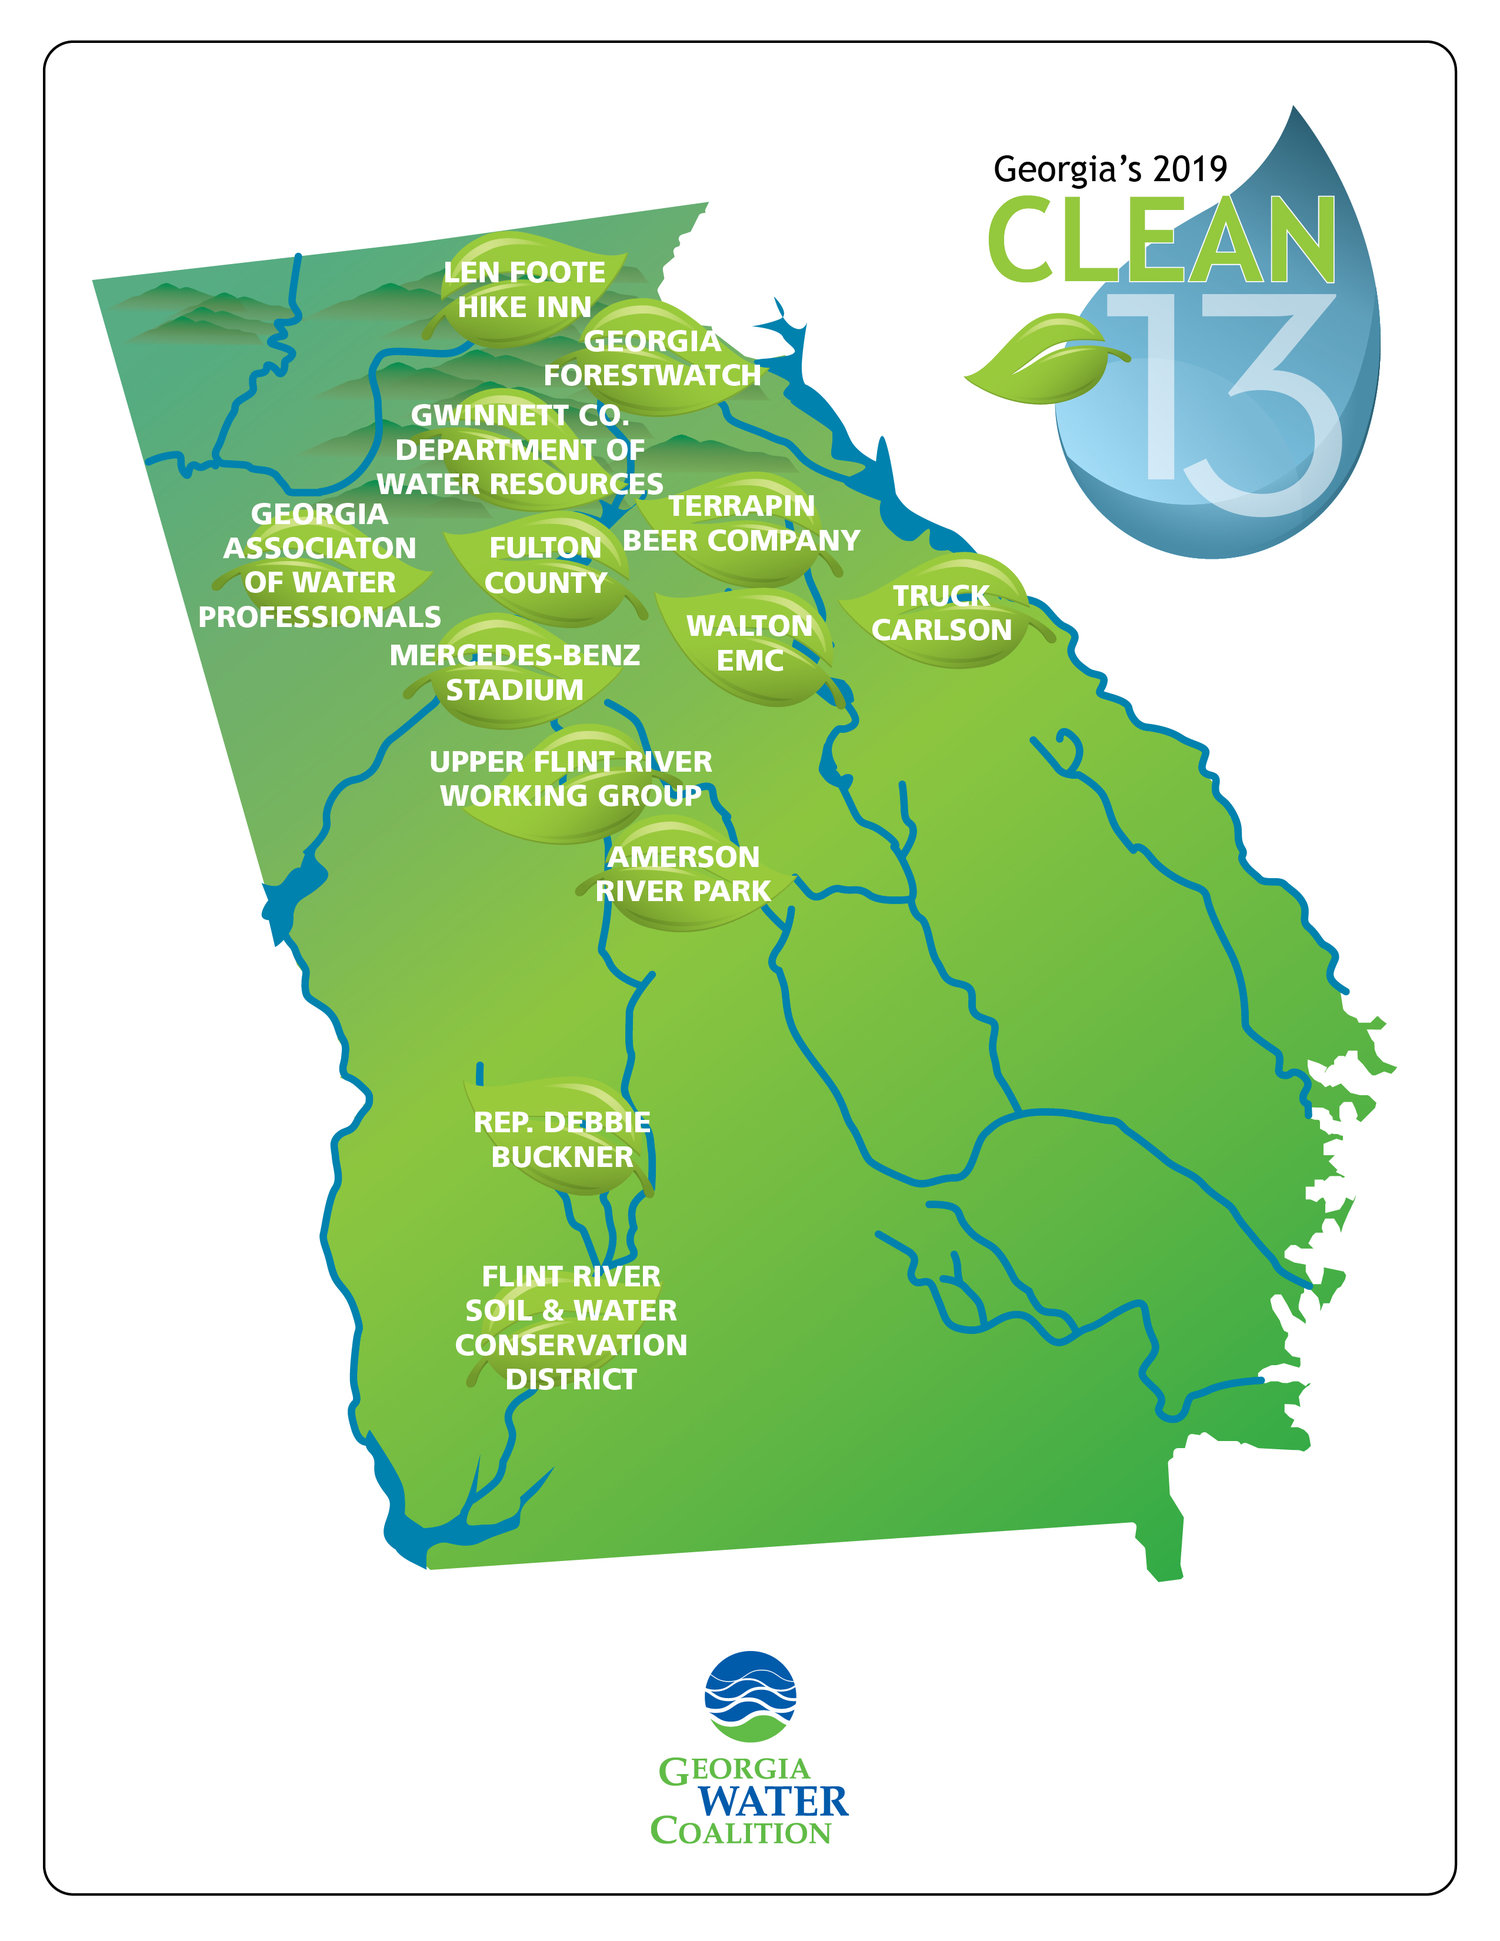 Flint River Soil And Water Conservation District Recognized In Georgia S 19 Clean 13 Report Flint River Soil And Water Conservation District